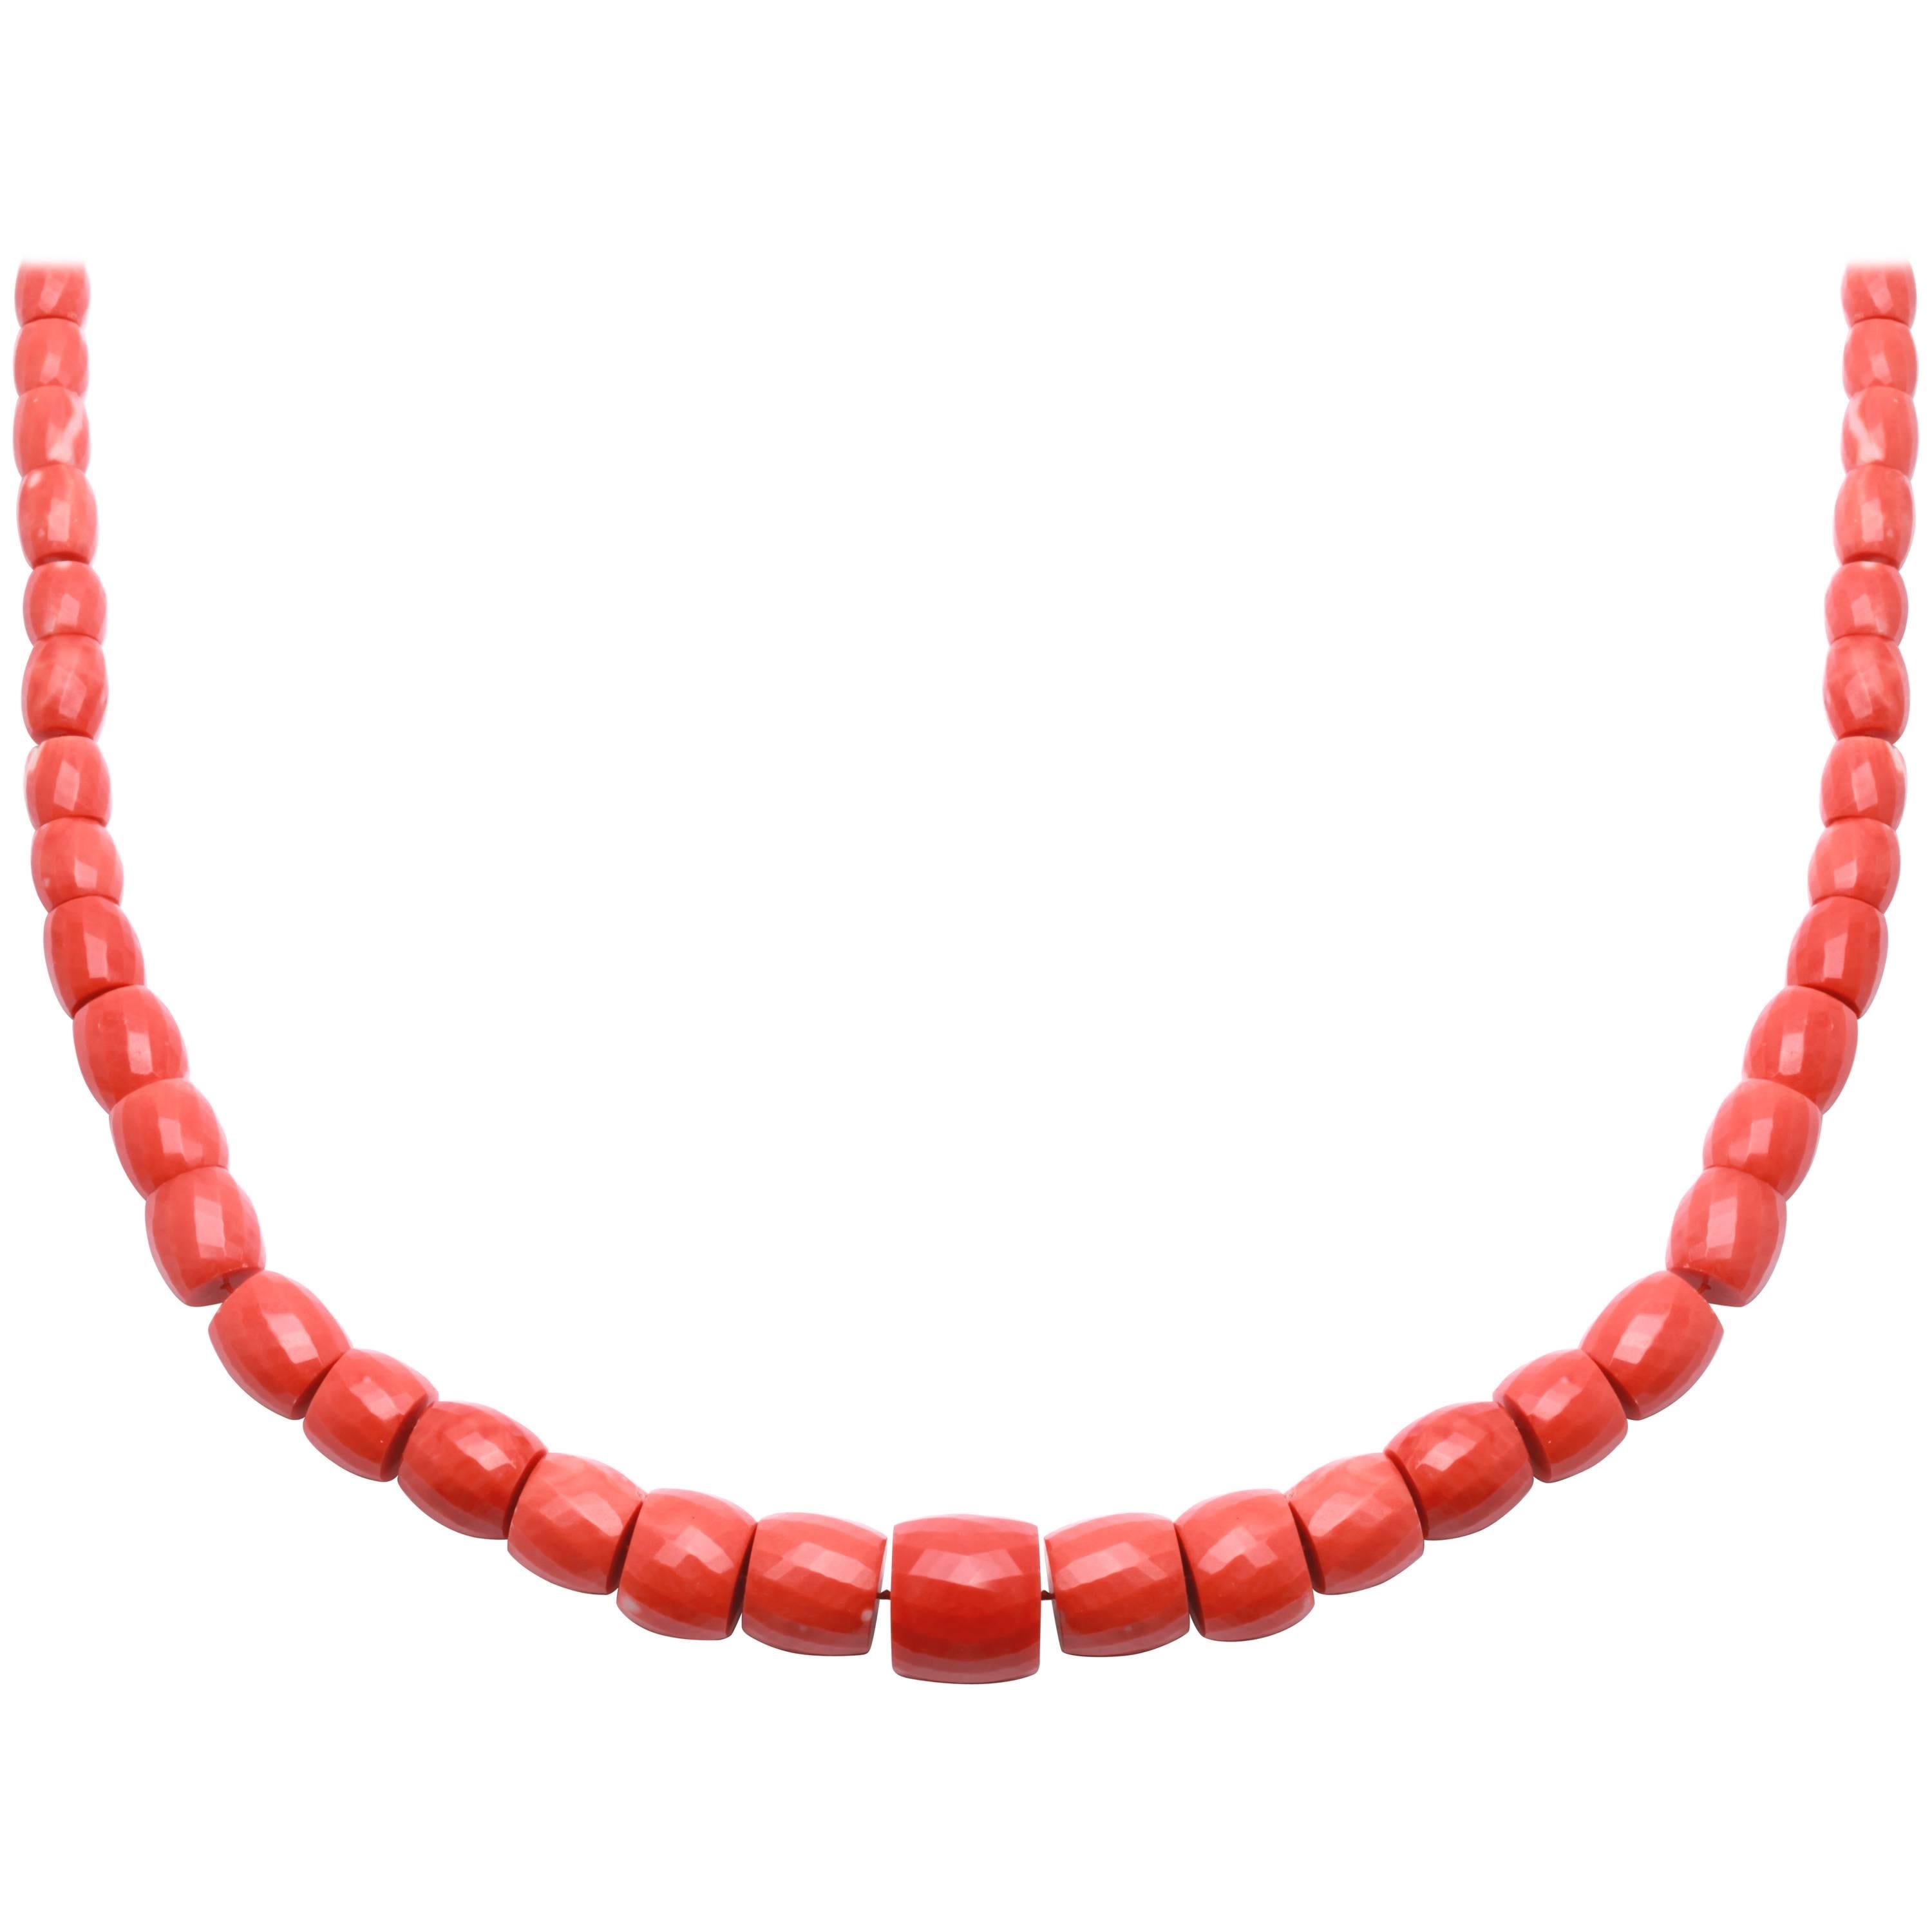 Sardinian Red Coral Strand Necklace